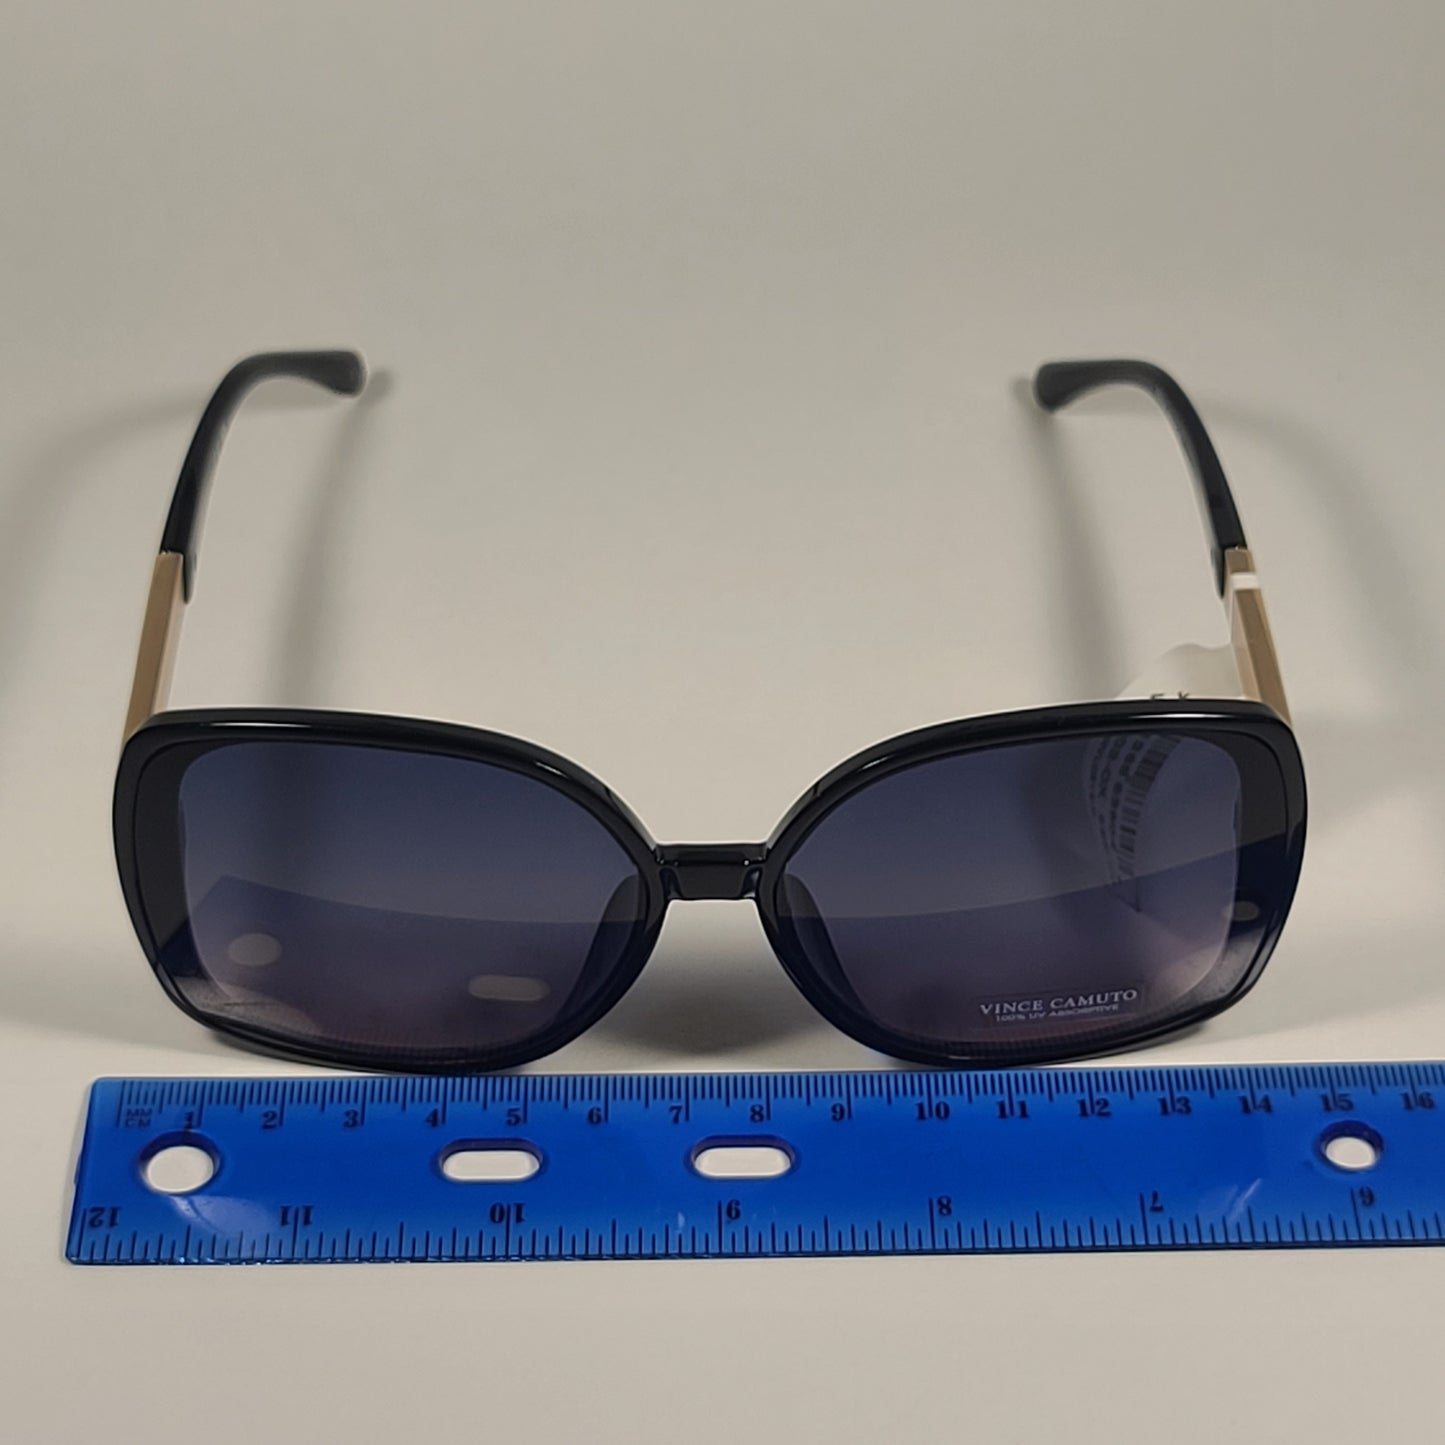 Vince Camuto VC1002 OX Butterfly Sunglasses Black Gold Frame Blue Gradient Lens - Sunglasses